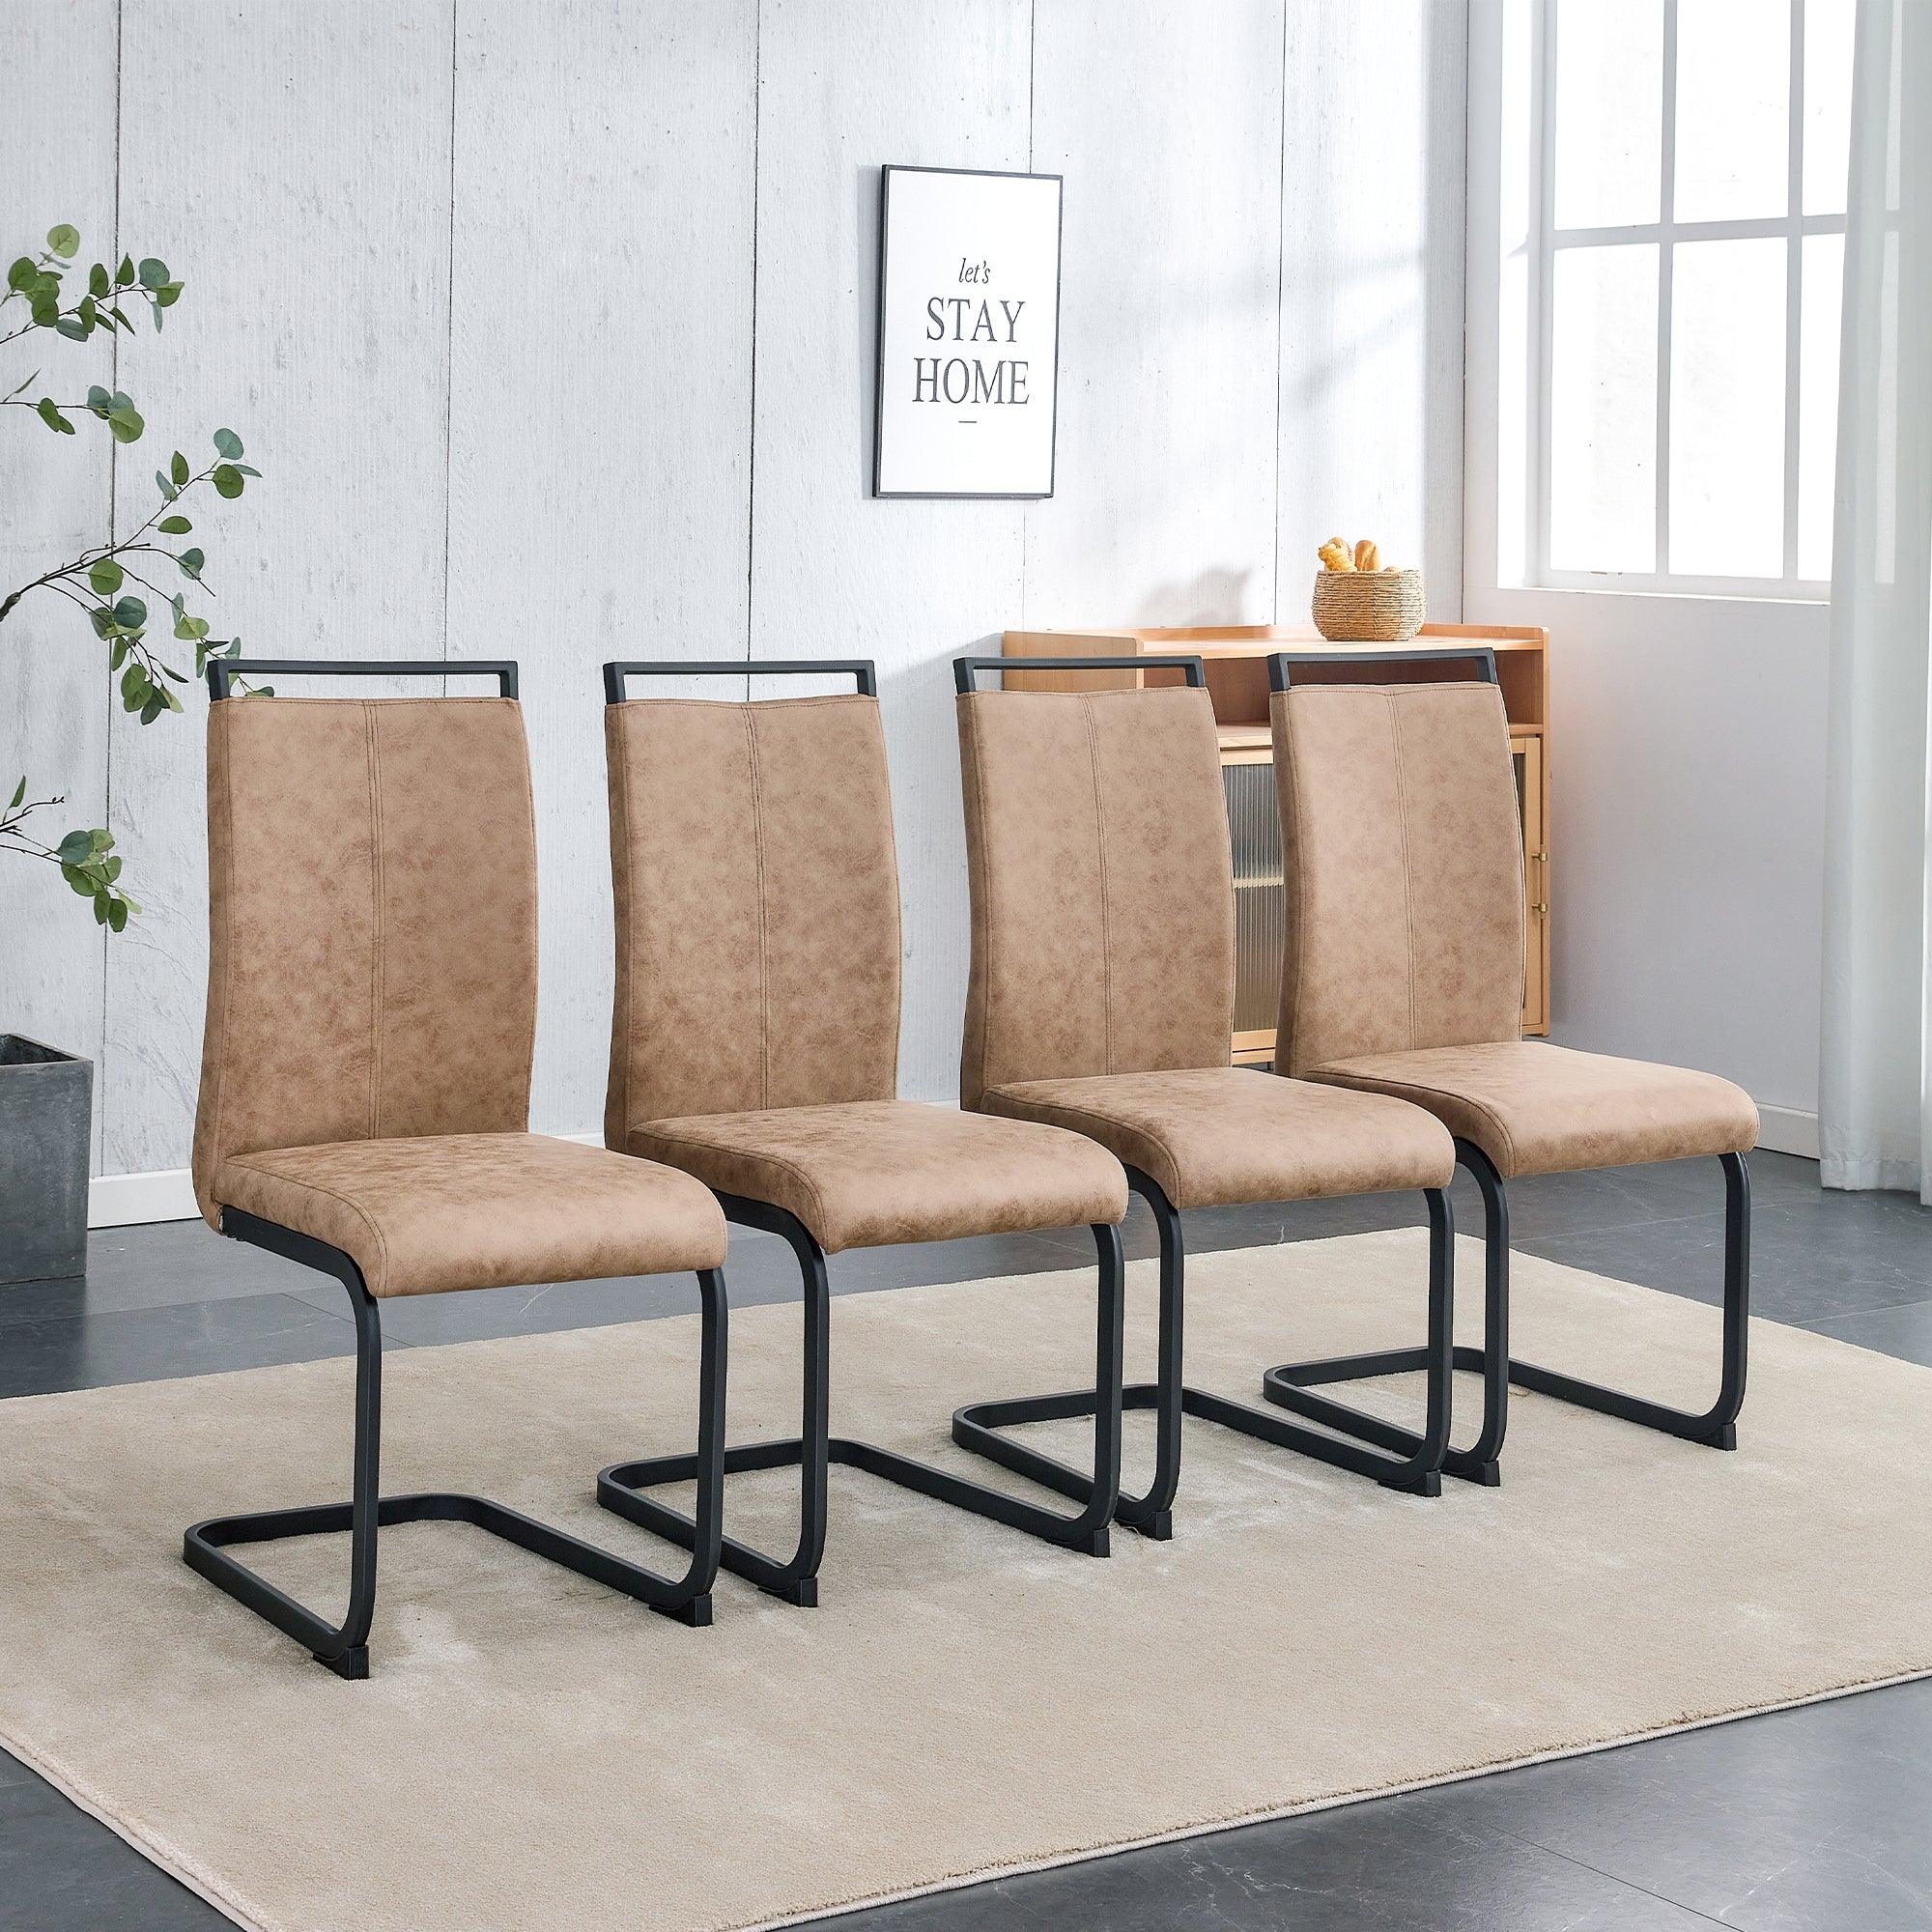 🆓🚛 Mid-Century Modern Dining Chairs Set Of 4, Side Dining Room/Kitchen Chairs With Faux Leather Padded Seat High Back, Chairs for Living Room, Brown